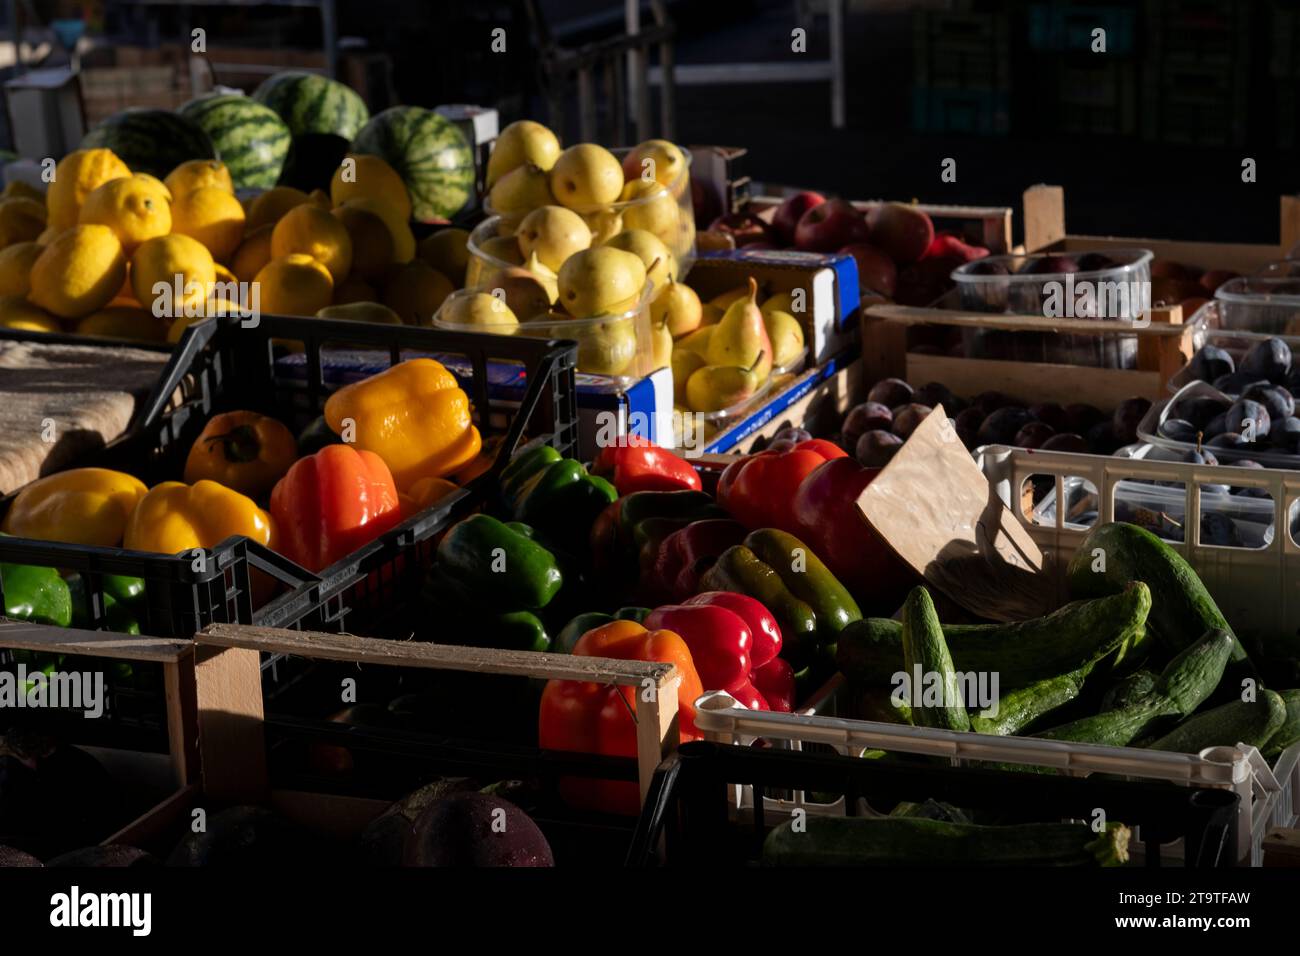 Variety of fruits and vegetables, including peppers, cucumbers, pears, lemons, watermelons and plums at an outdoor farmers' market in Florence, Italy. Stock Photo